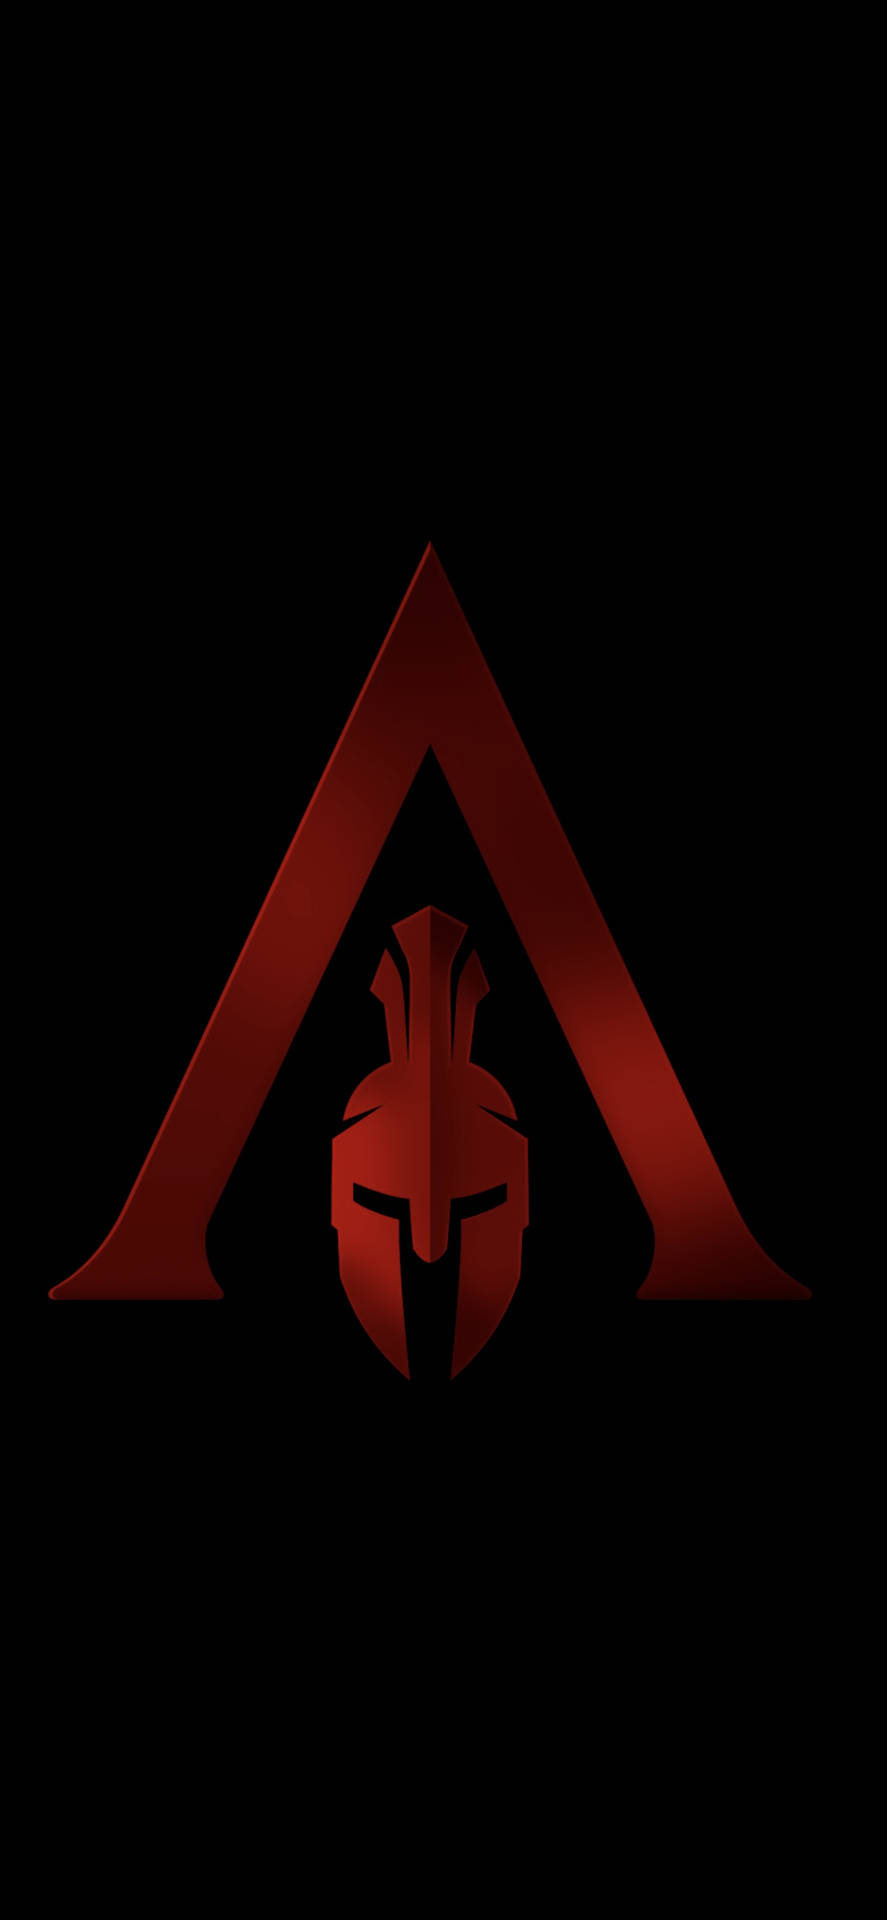 Assassin's Creed Logo In Red Odyssey Iphone Background